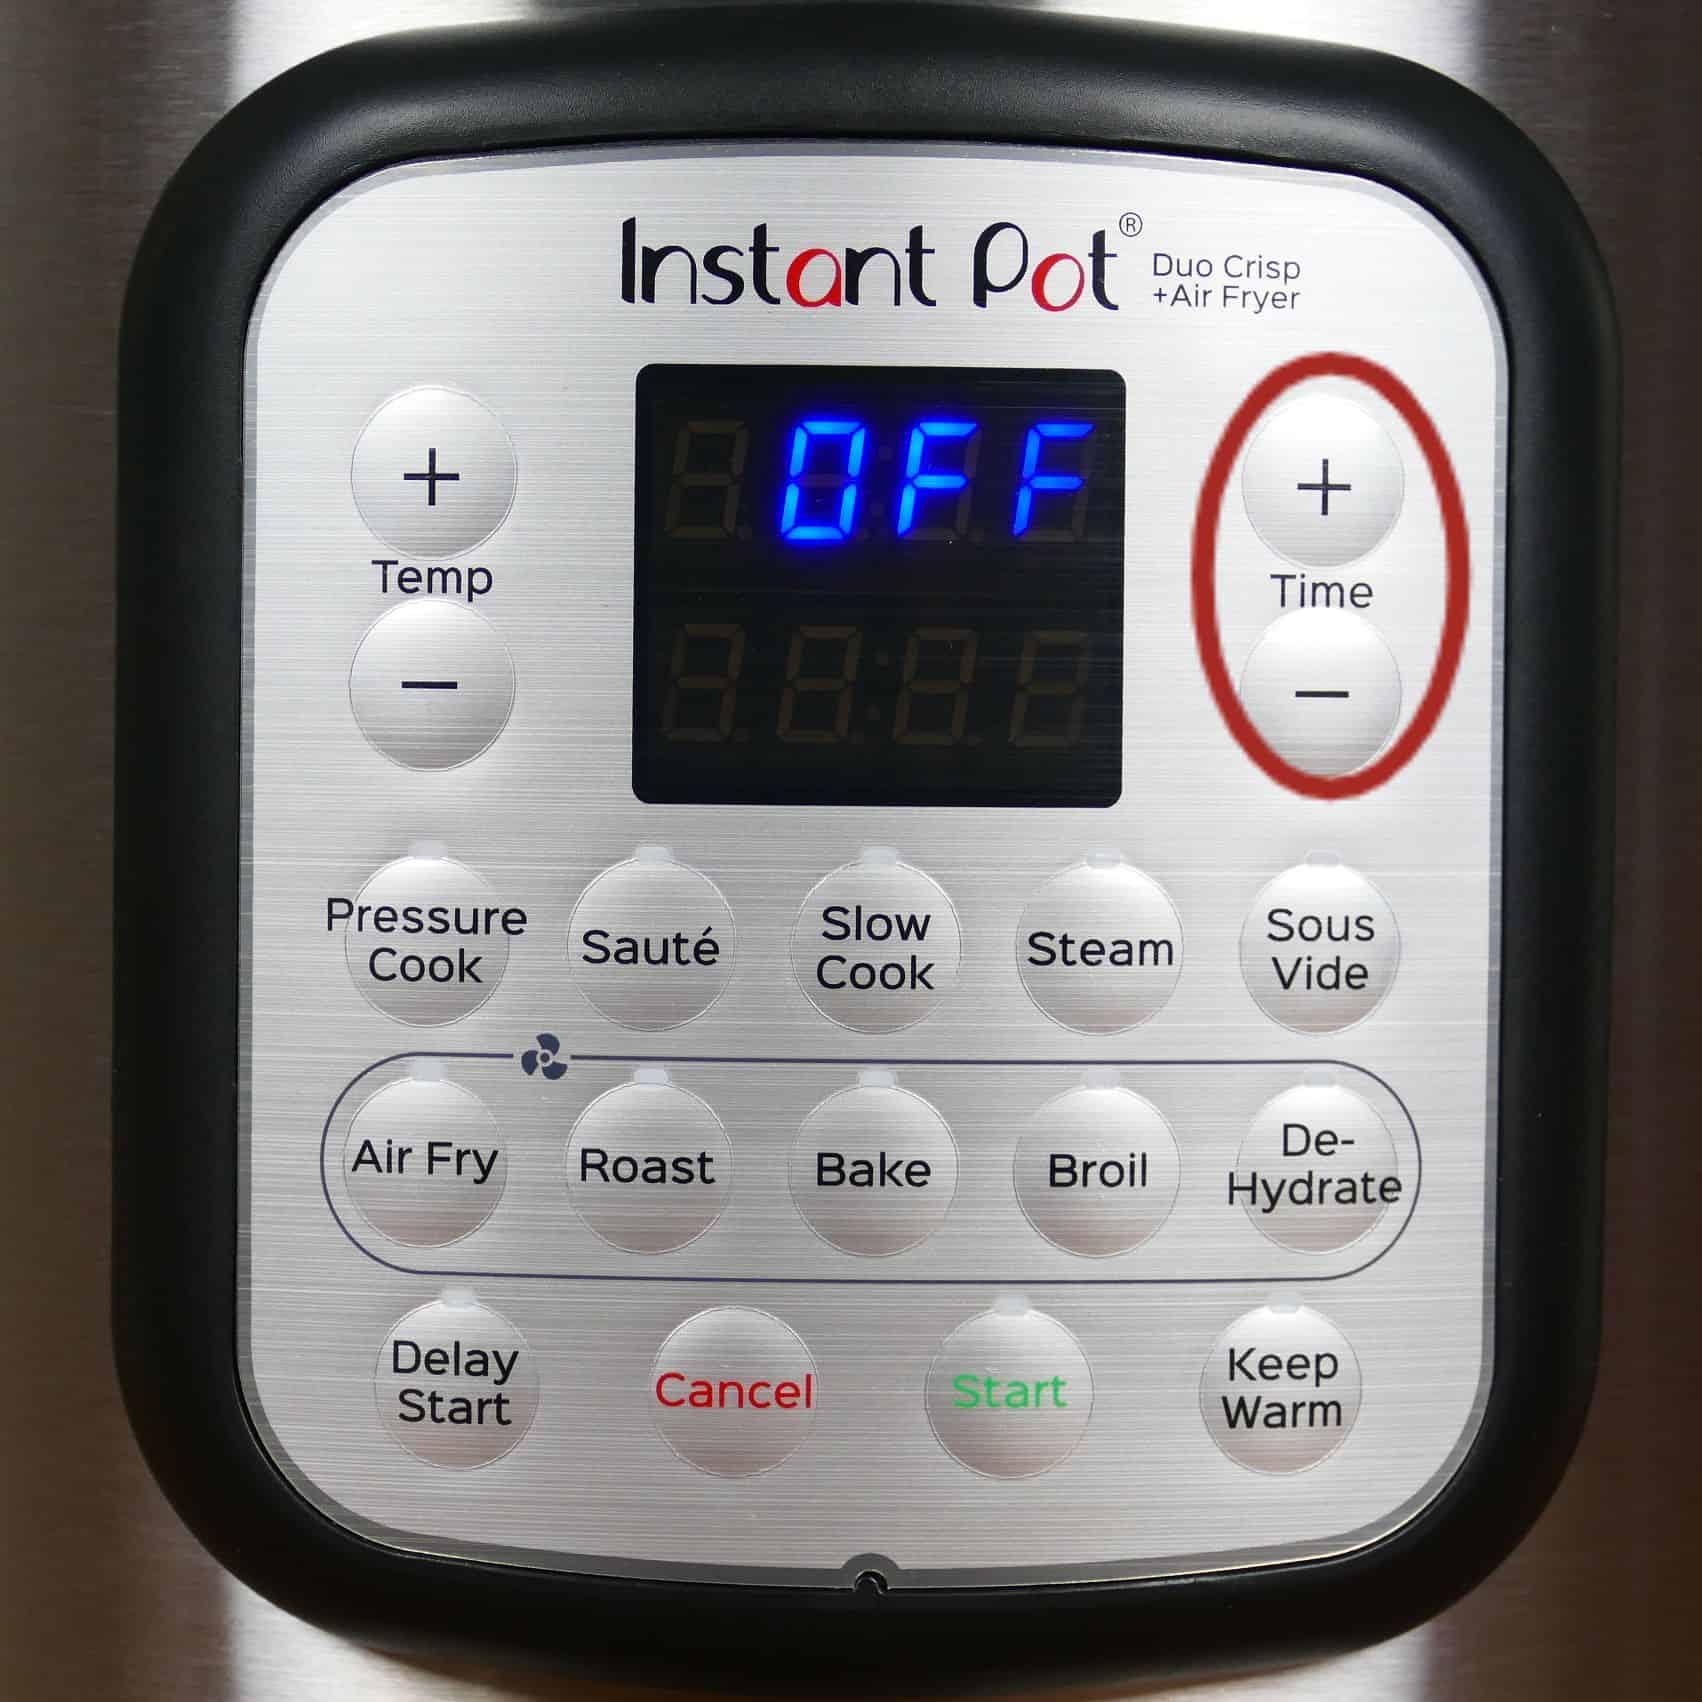 Instant Pot Duo Crisp Display Panel Time plus minus circled in red